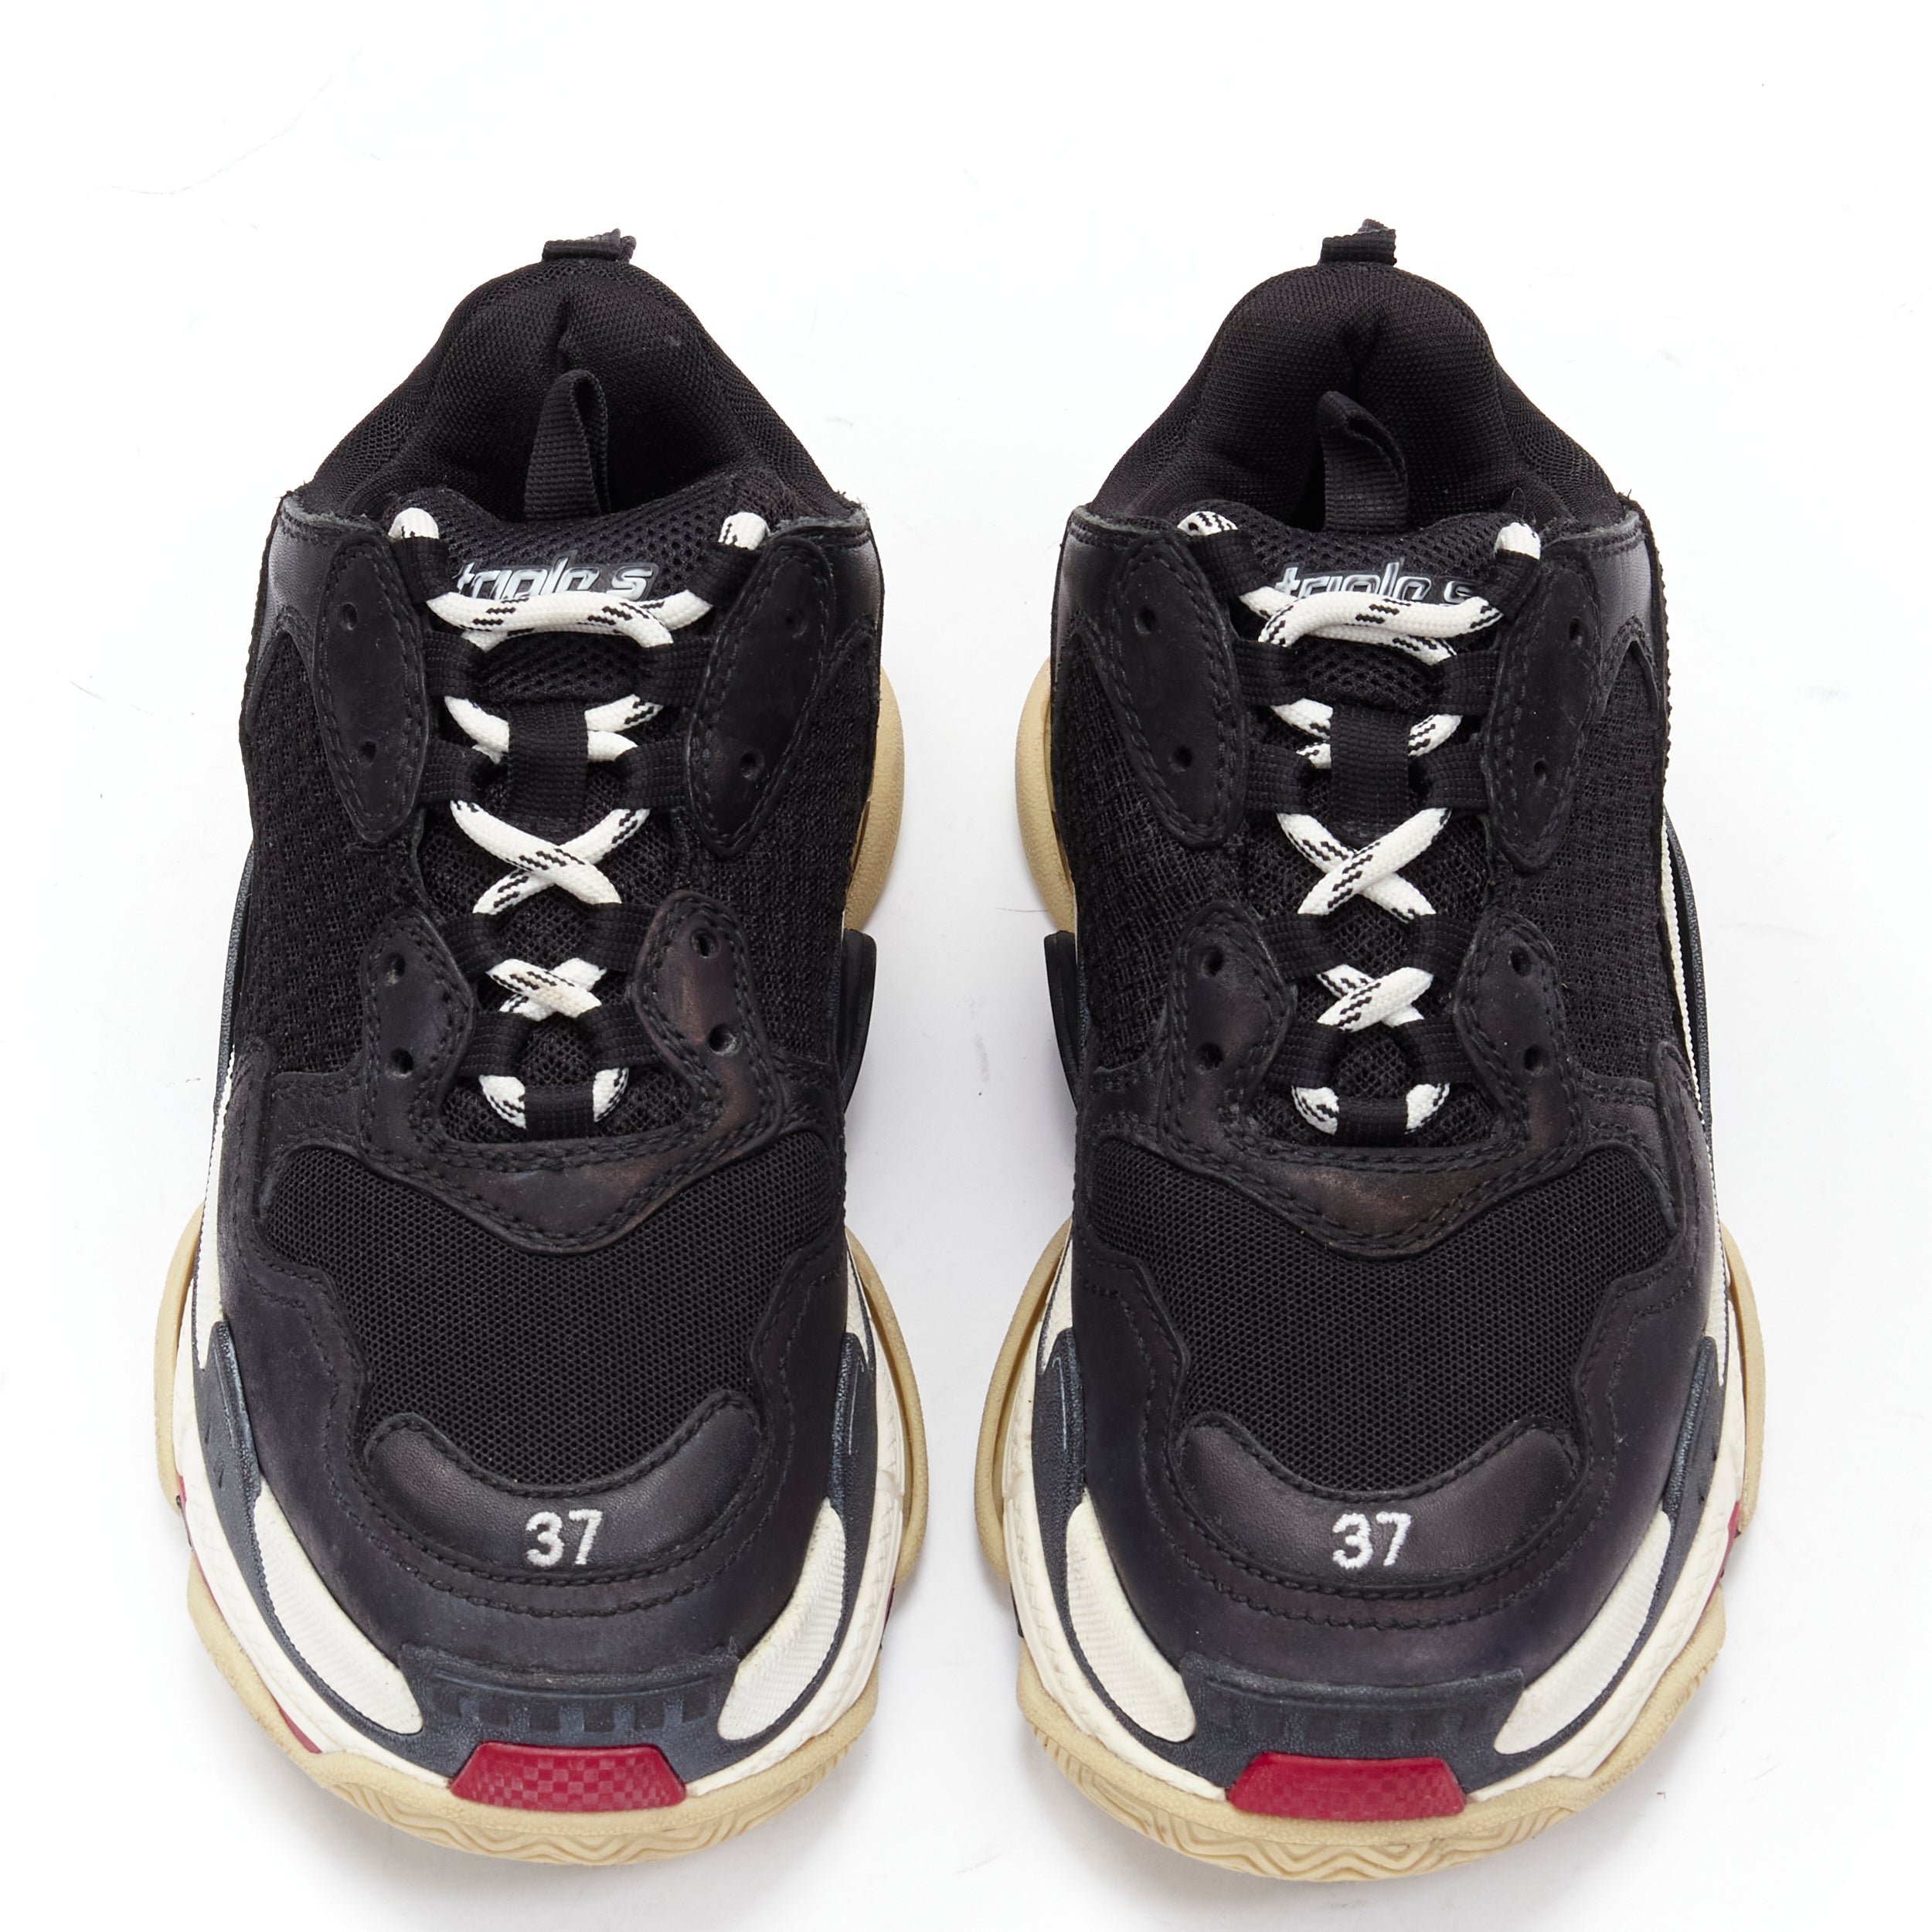 BALENCIAGA Triple S black mesh white red triple sole chunky sneaker EU37 
Reference: MELK/A00225 
Brand: Balenciaga 
Designer: Demna 
Model: Triple S 
Material: Mesh 
Color: Black 
Pattern: Solid 
Made in: China 

CONDITION: 
Condition: Good, this